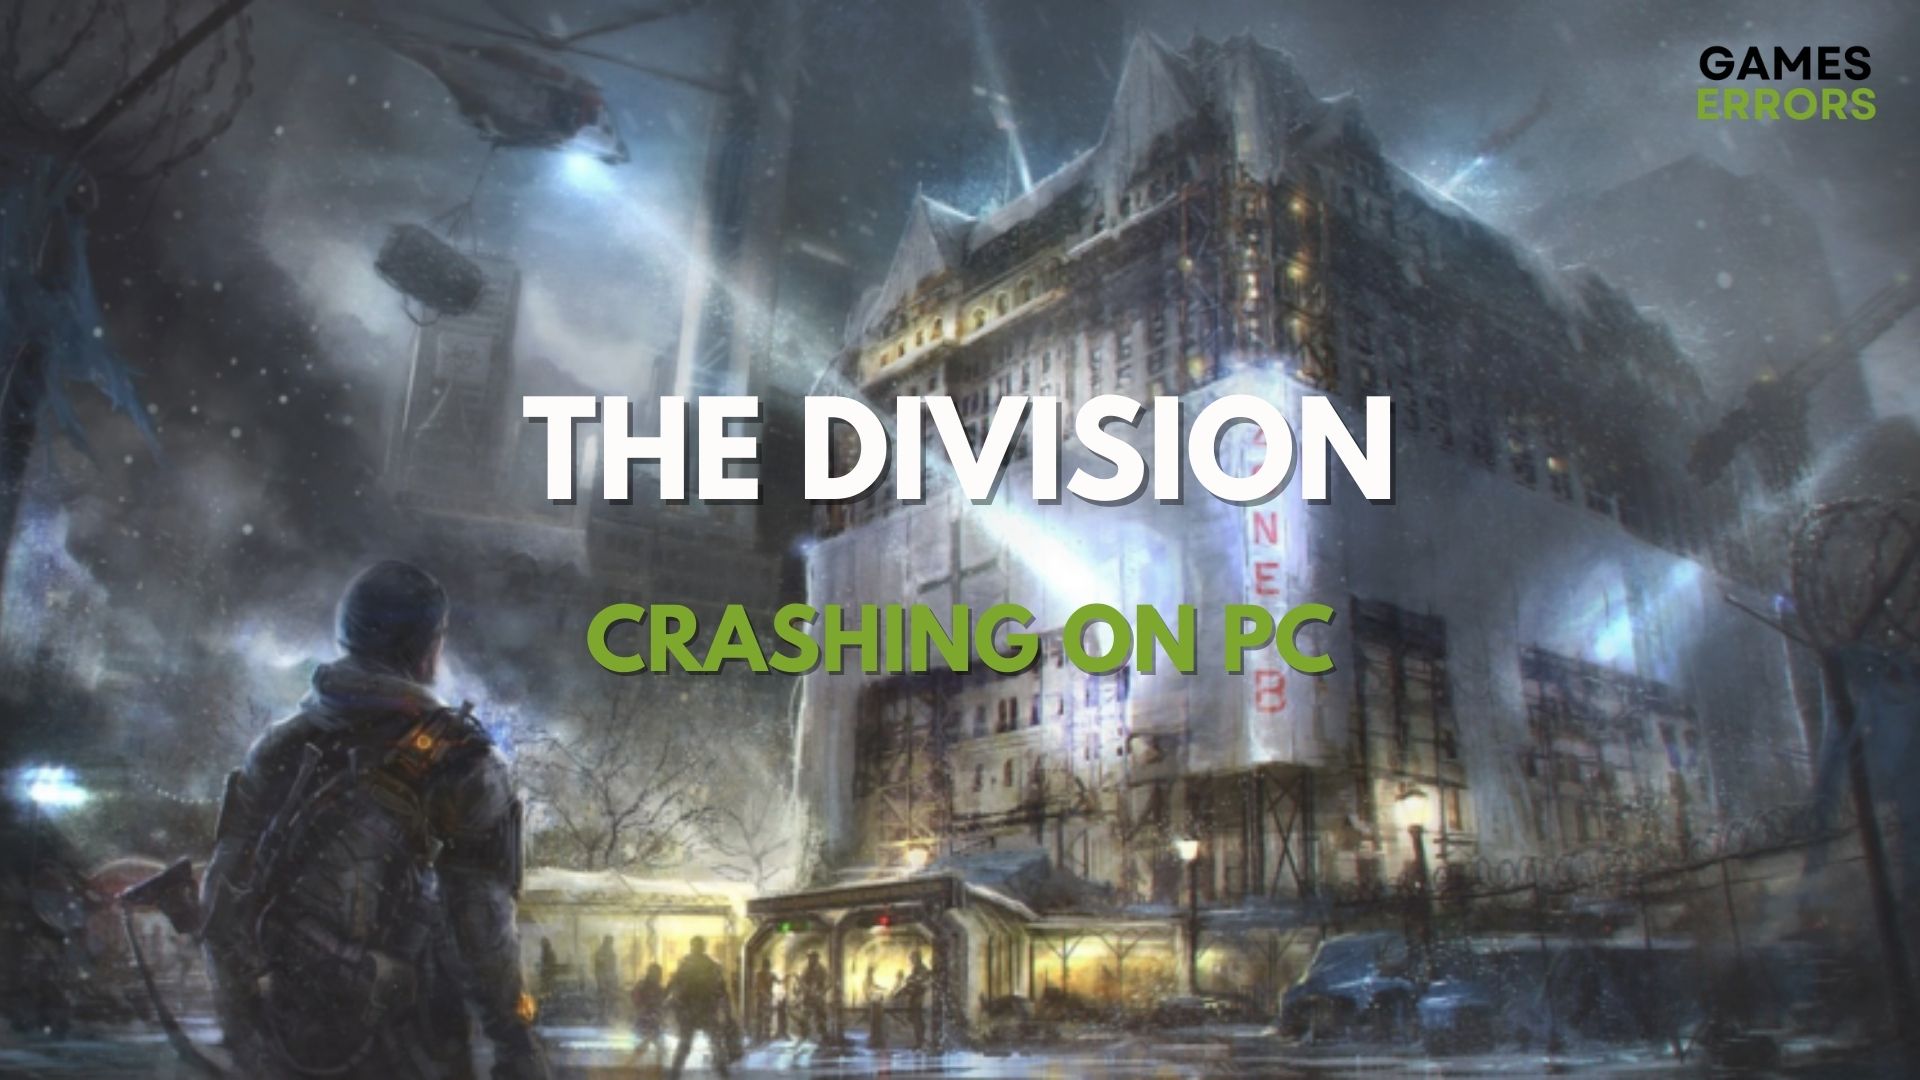 The Division Crashing On PC